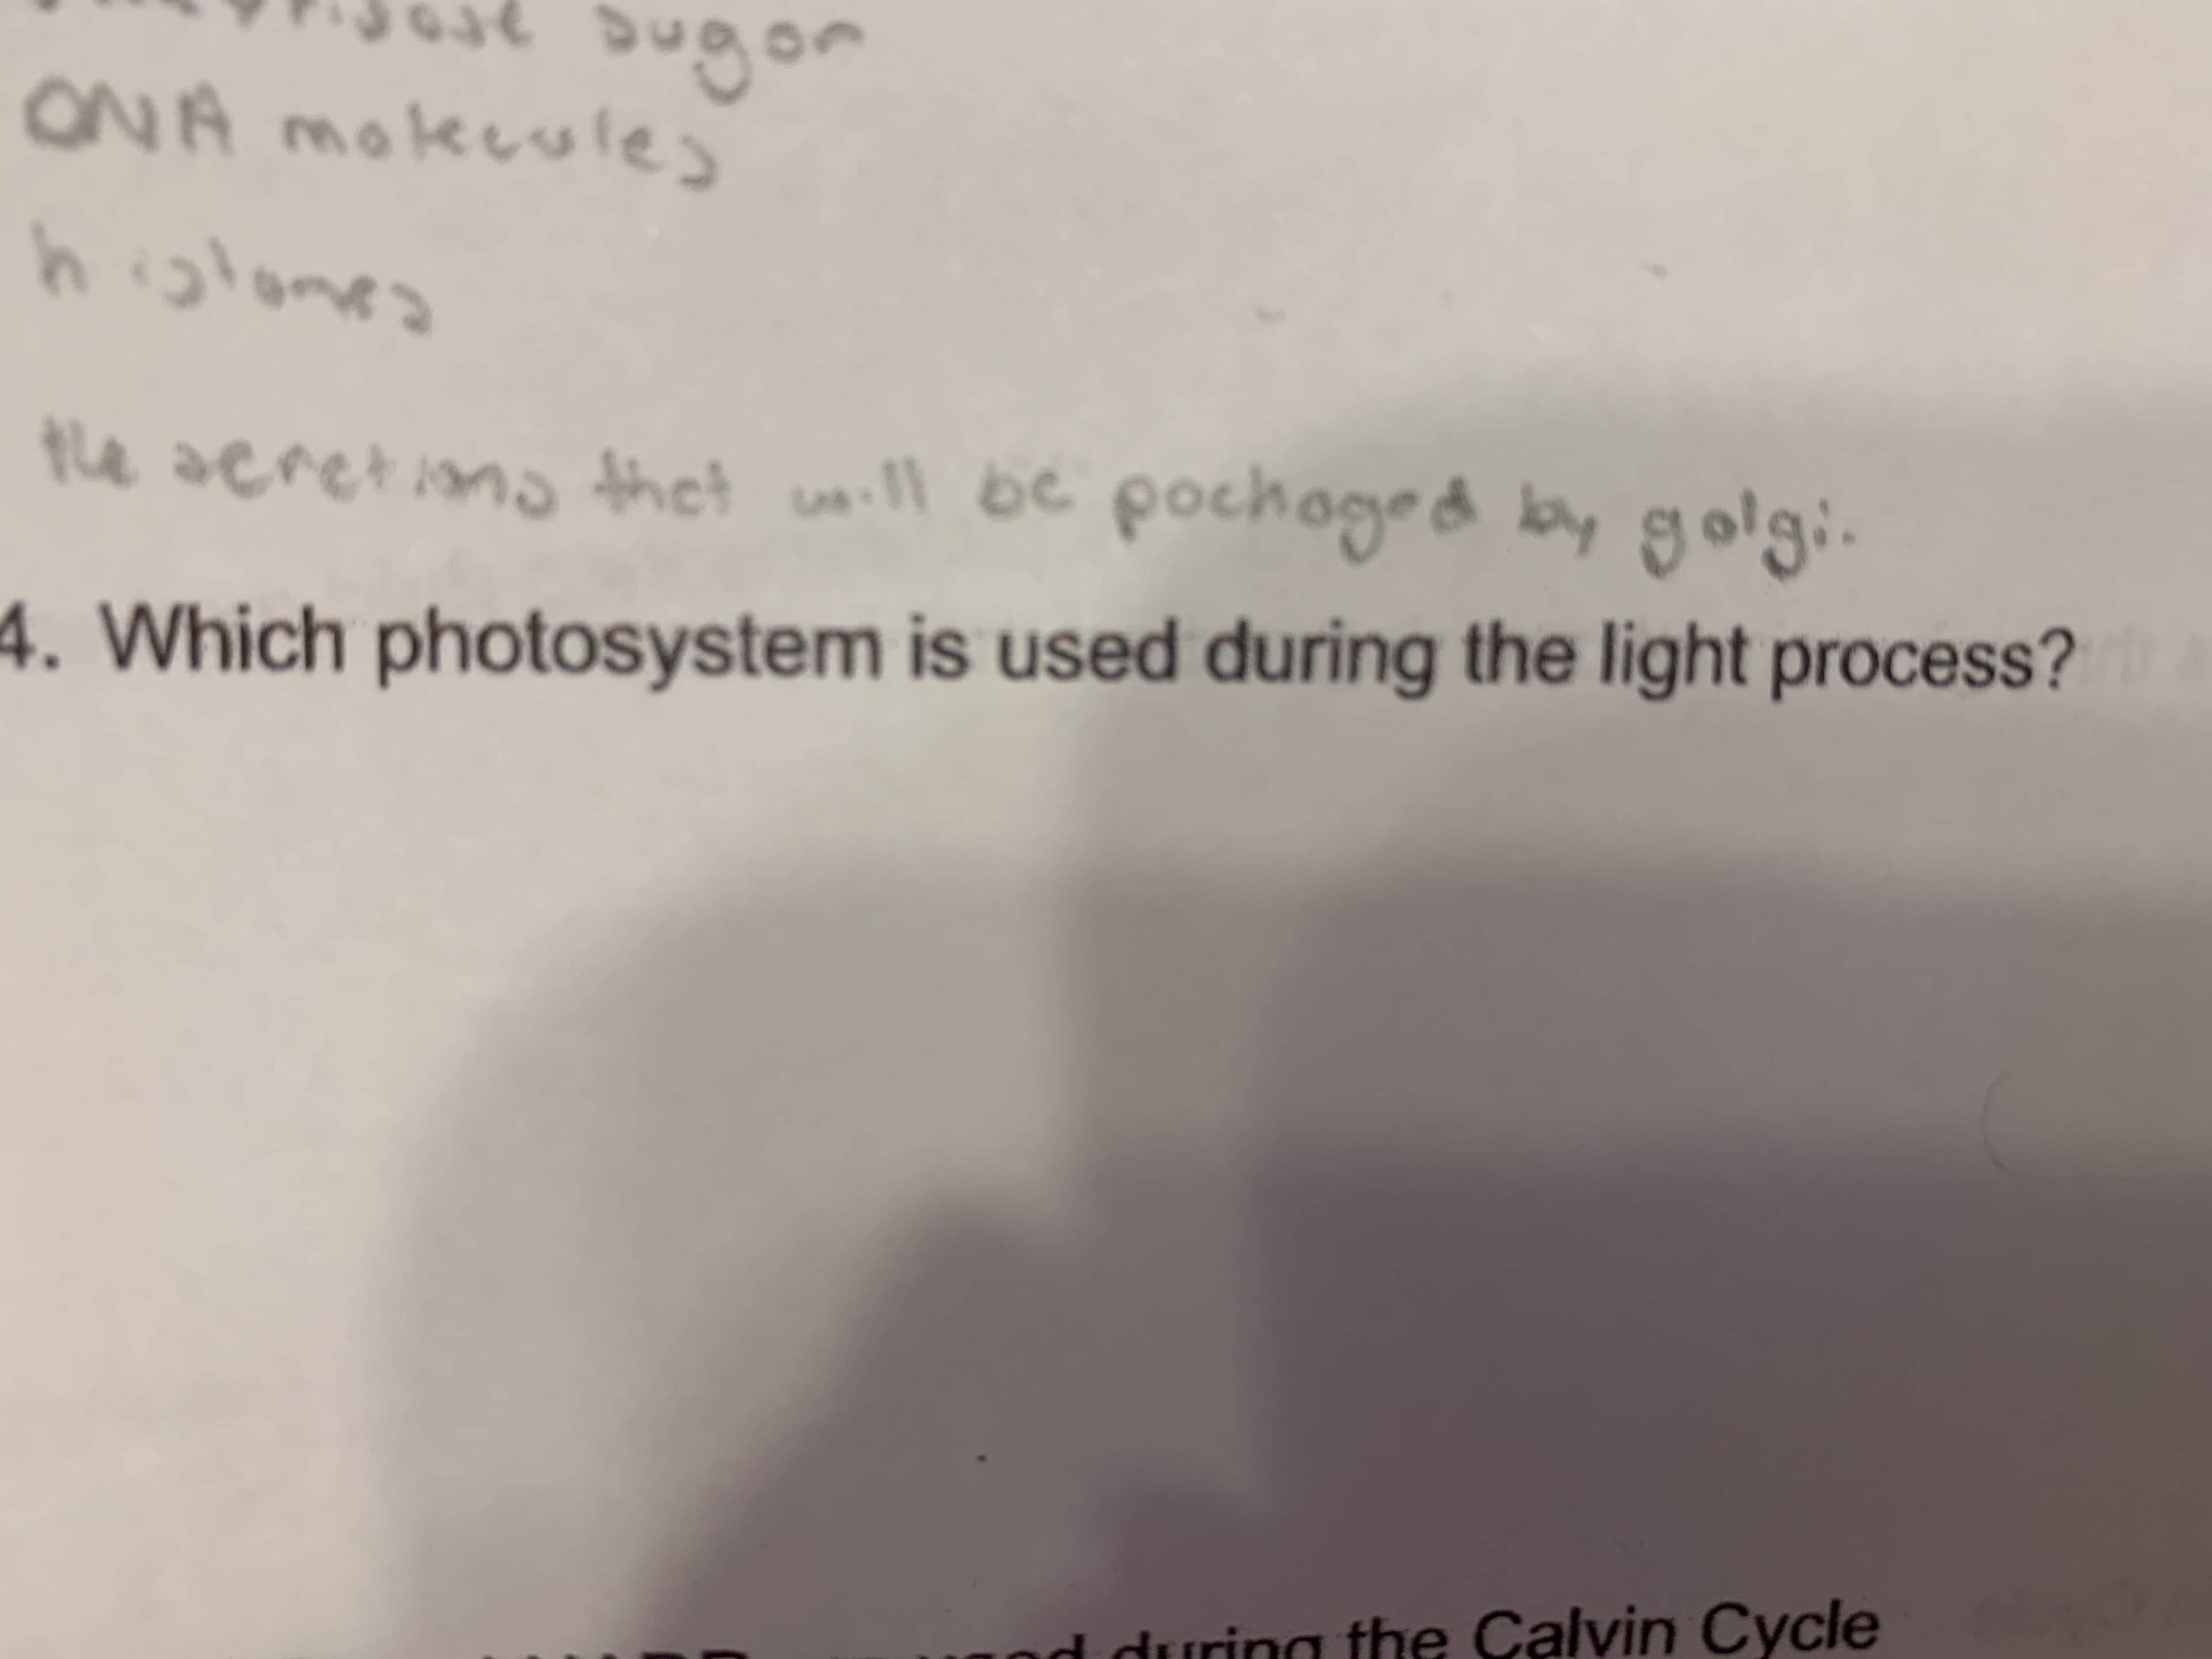 Which photosystem is used during the light process?
